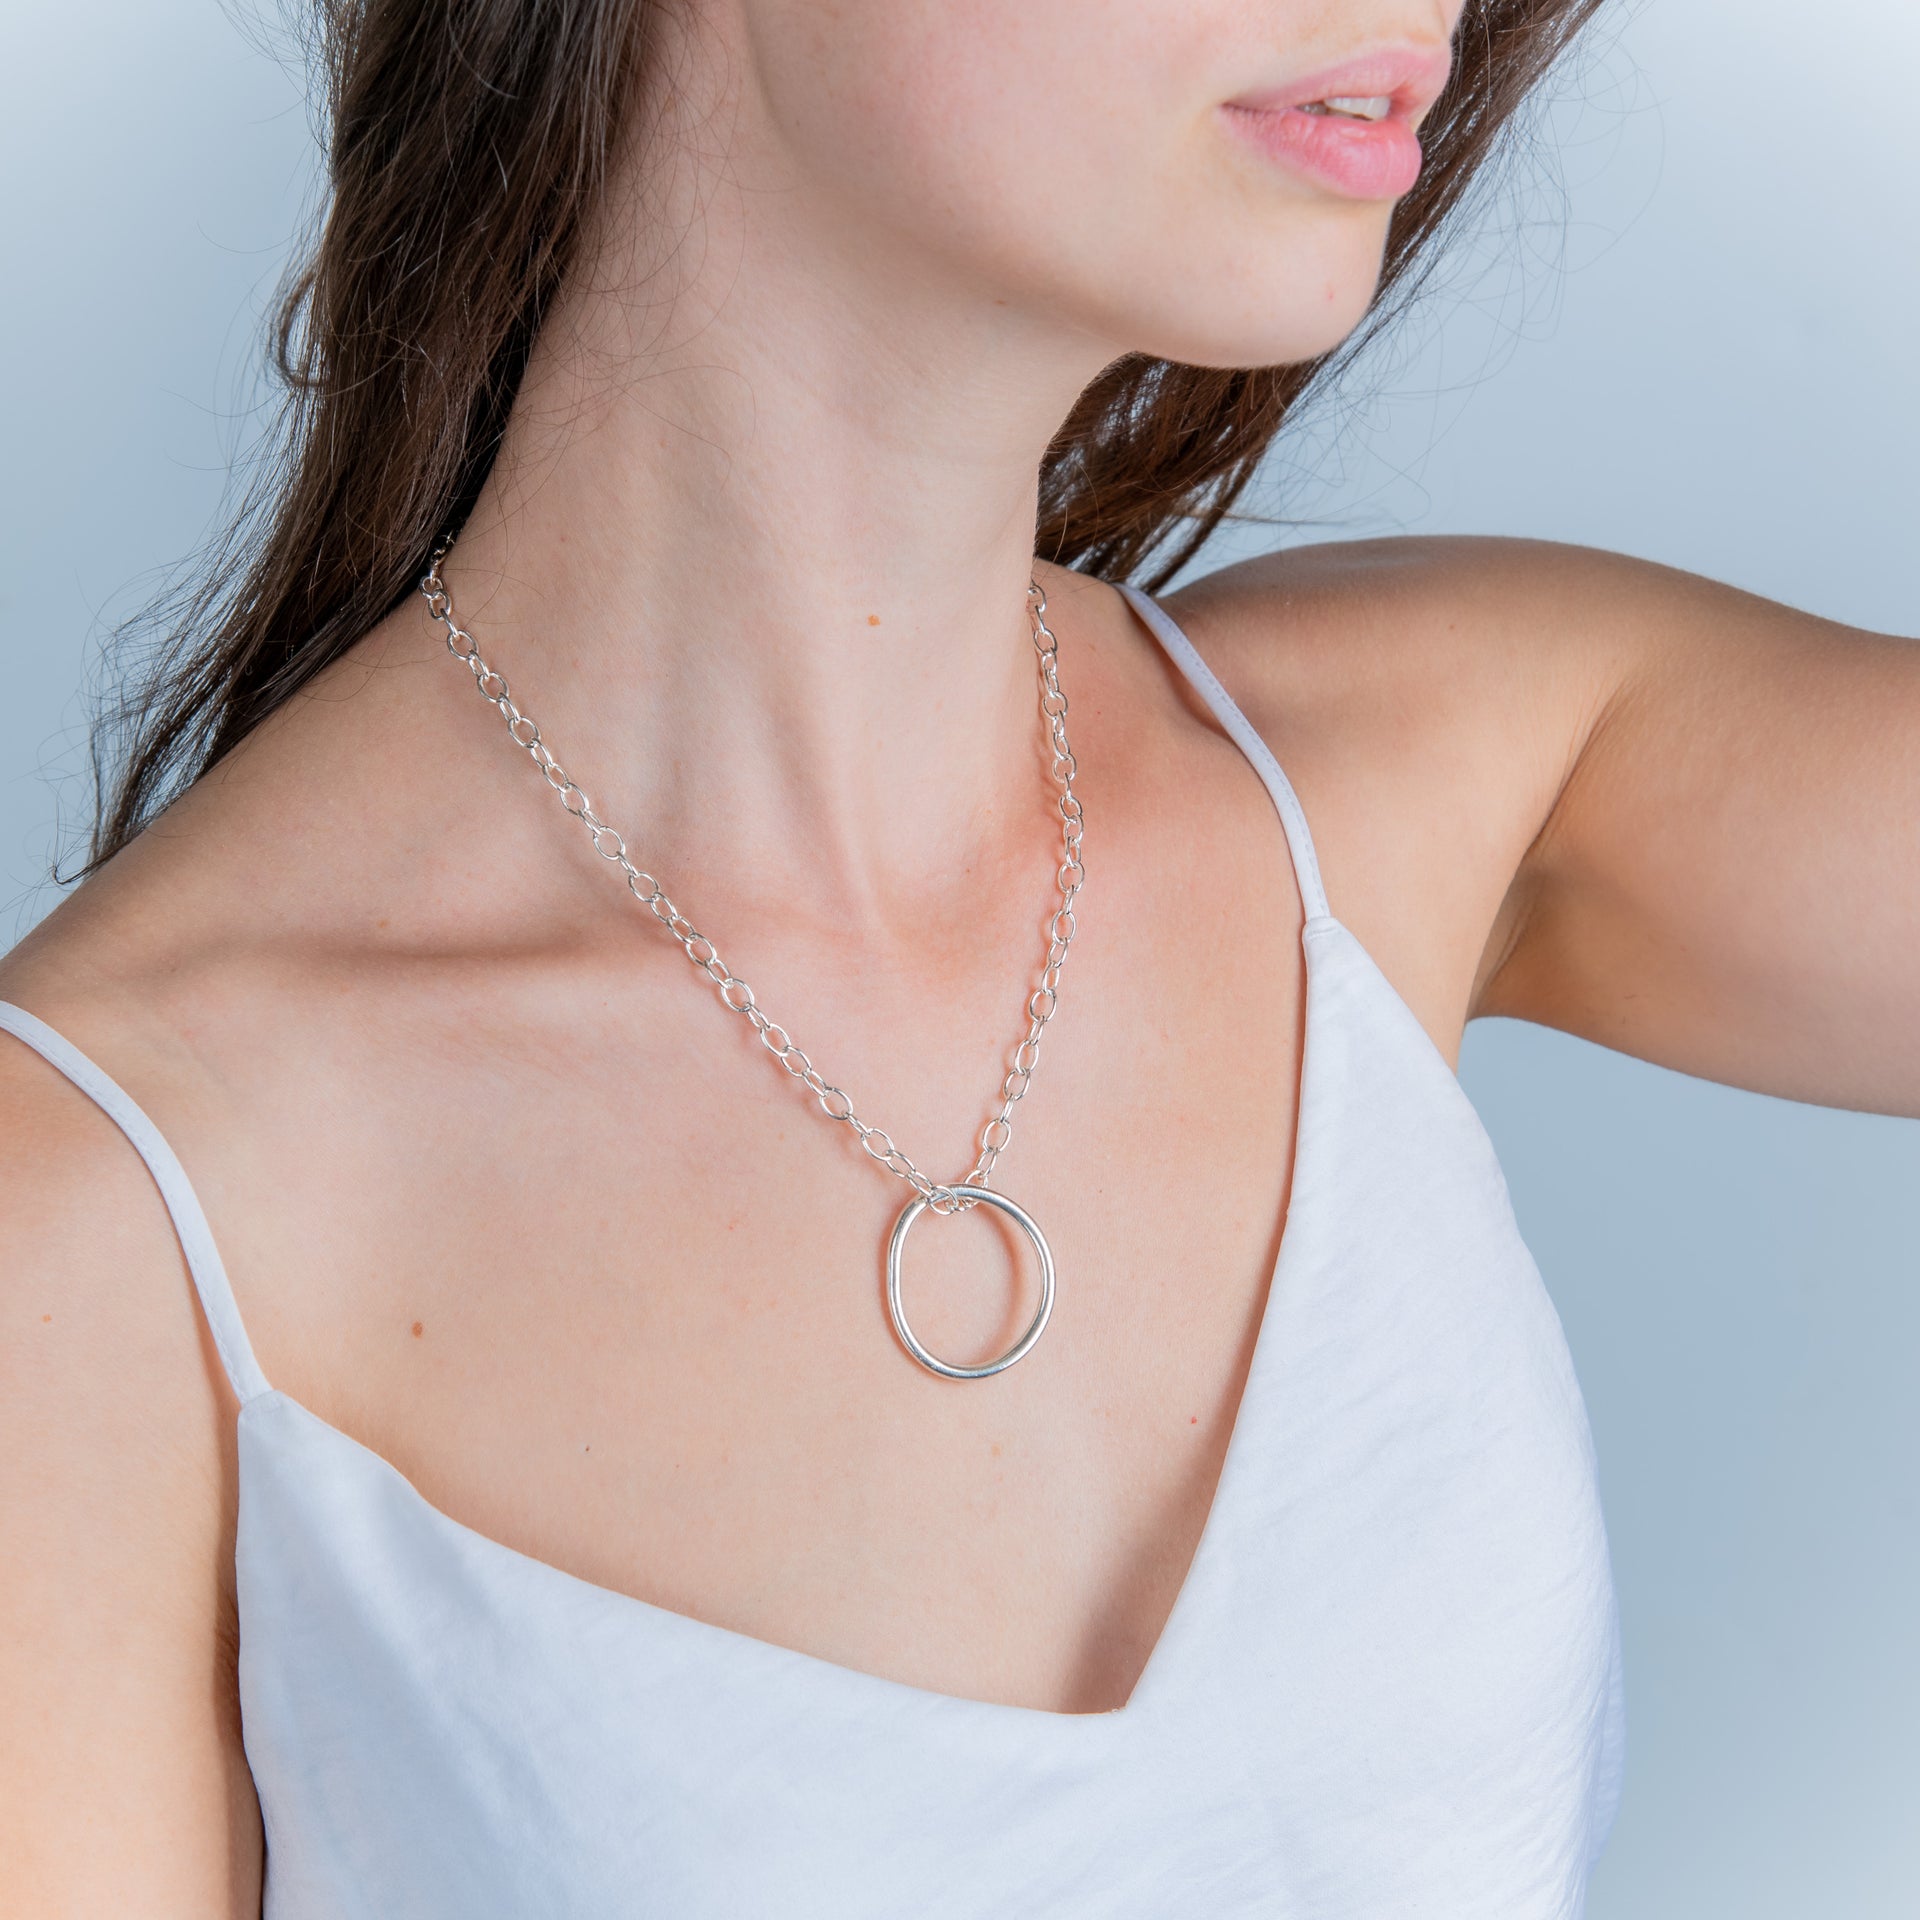 handmade chain silver womens necklace. Made in Australia. Nickel free. Christmas presents